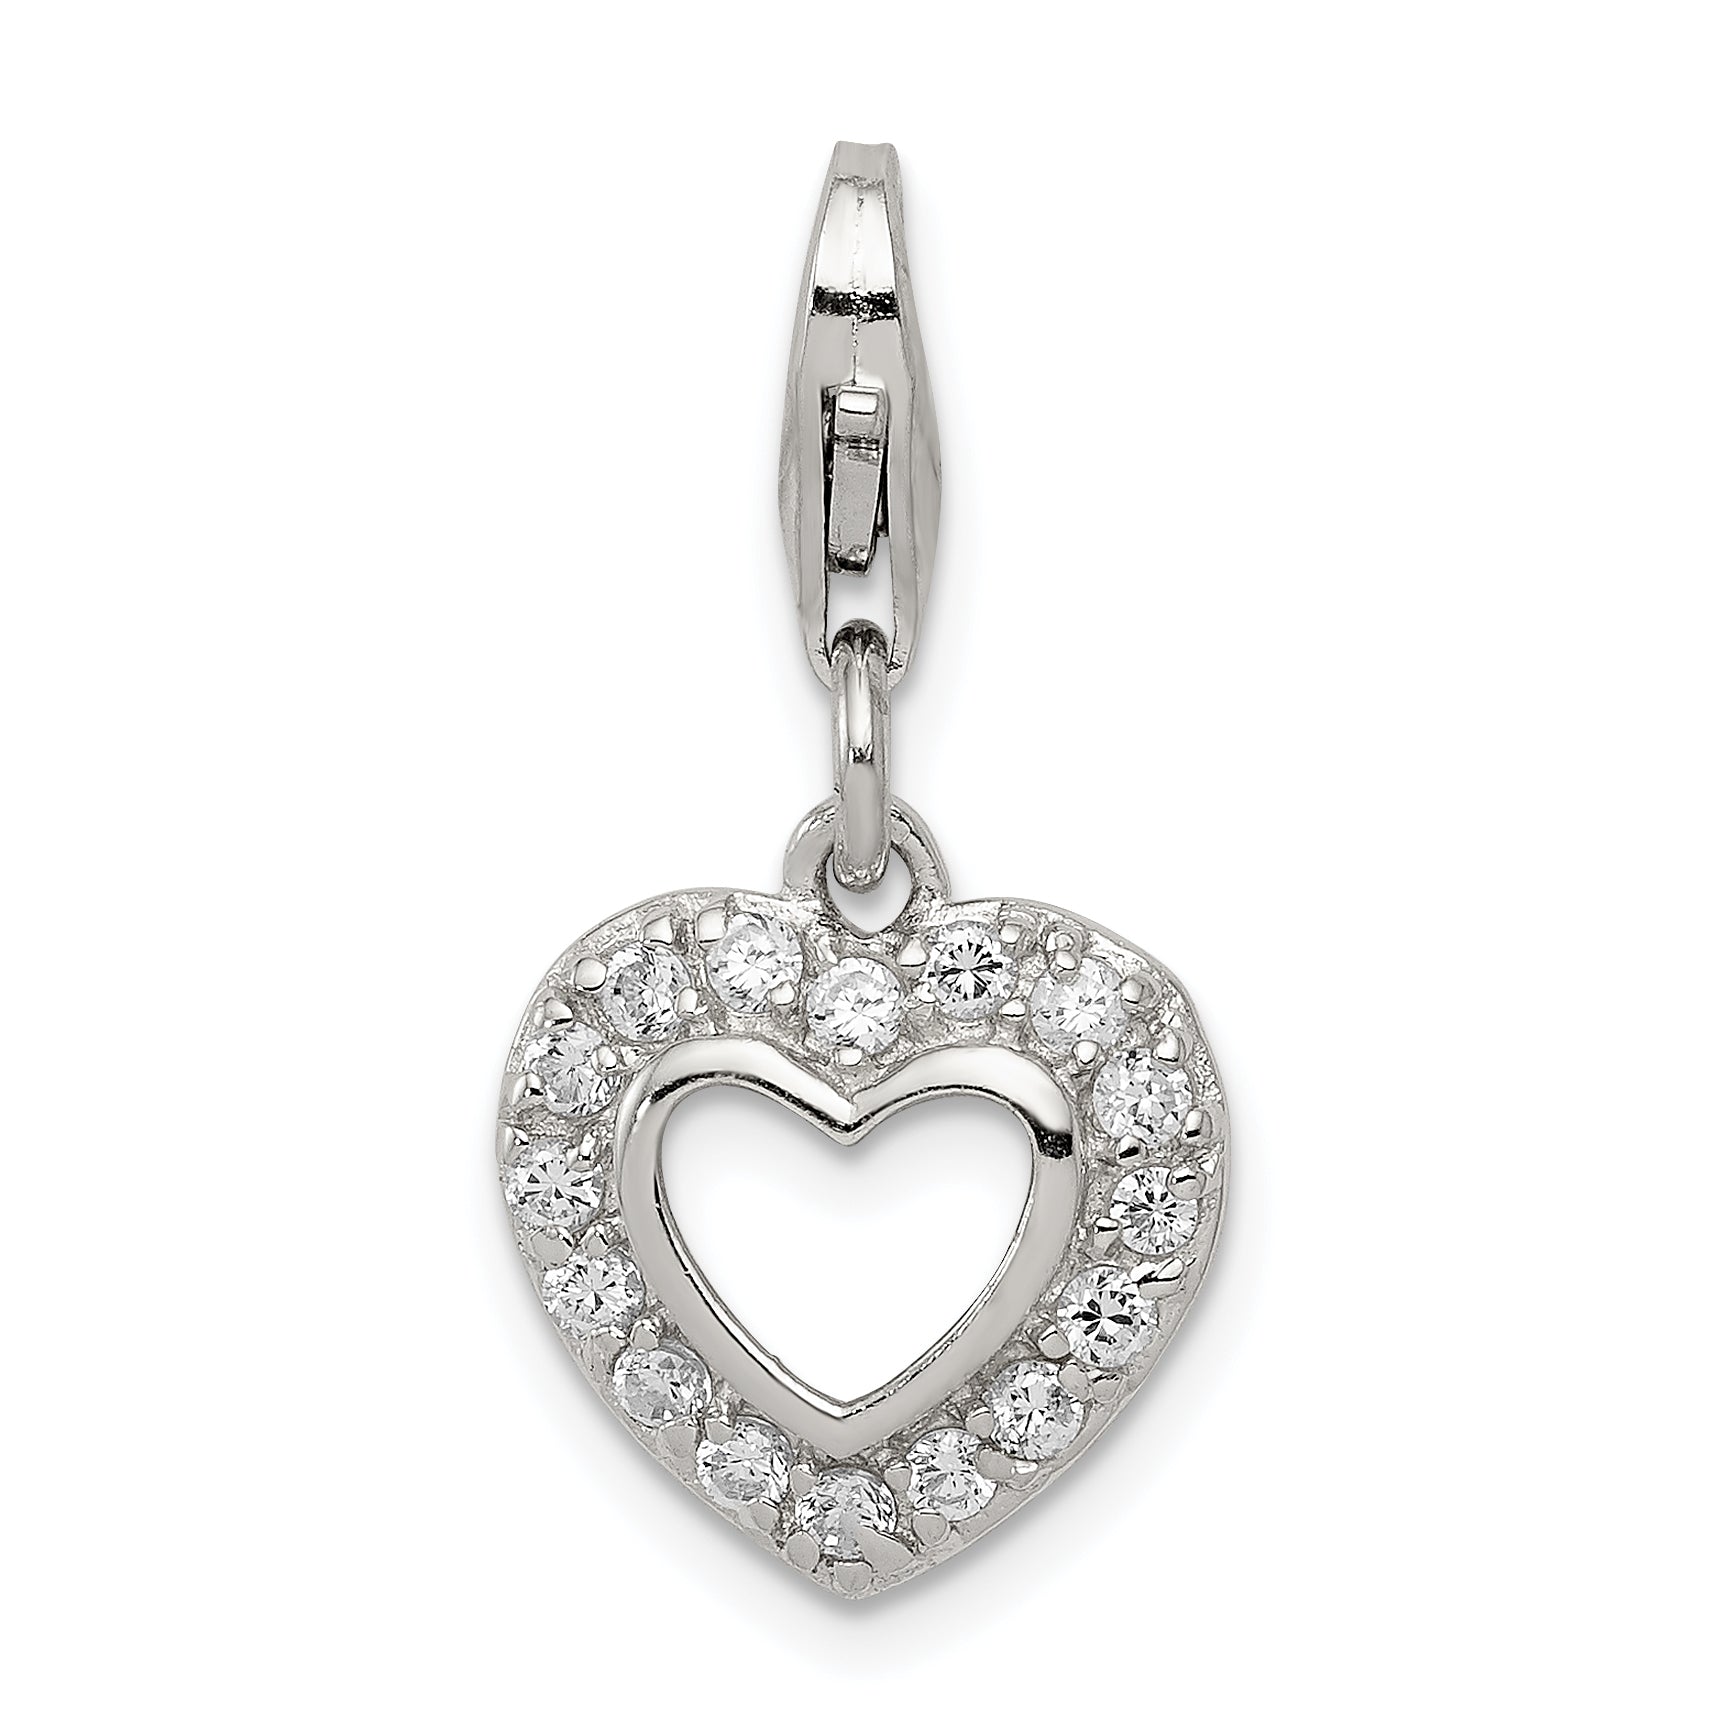 Sterling Silver CZ Heart Charm